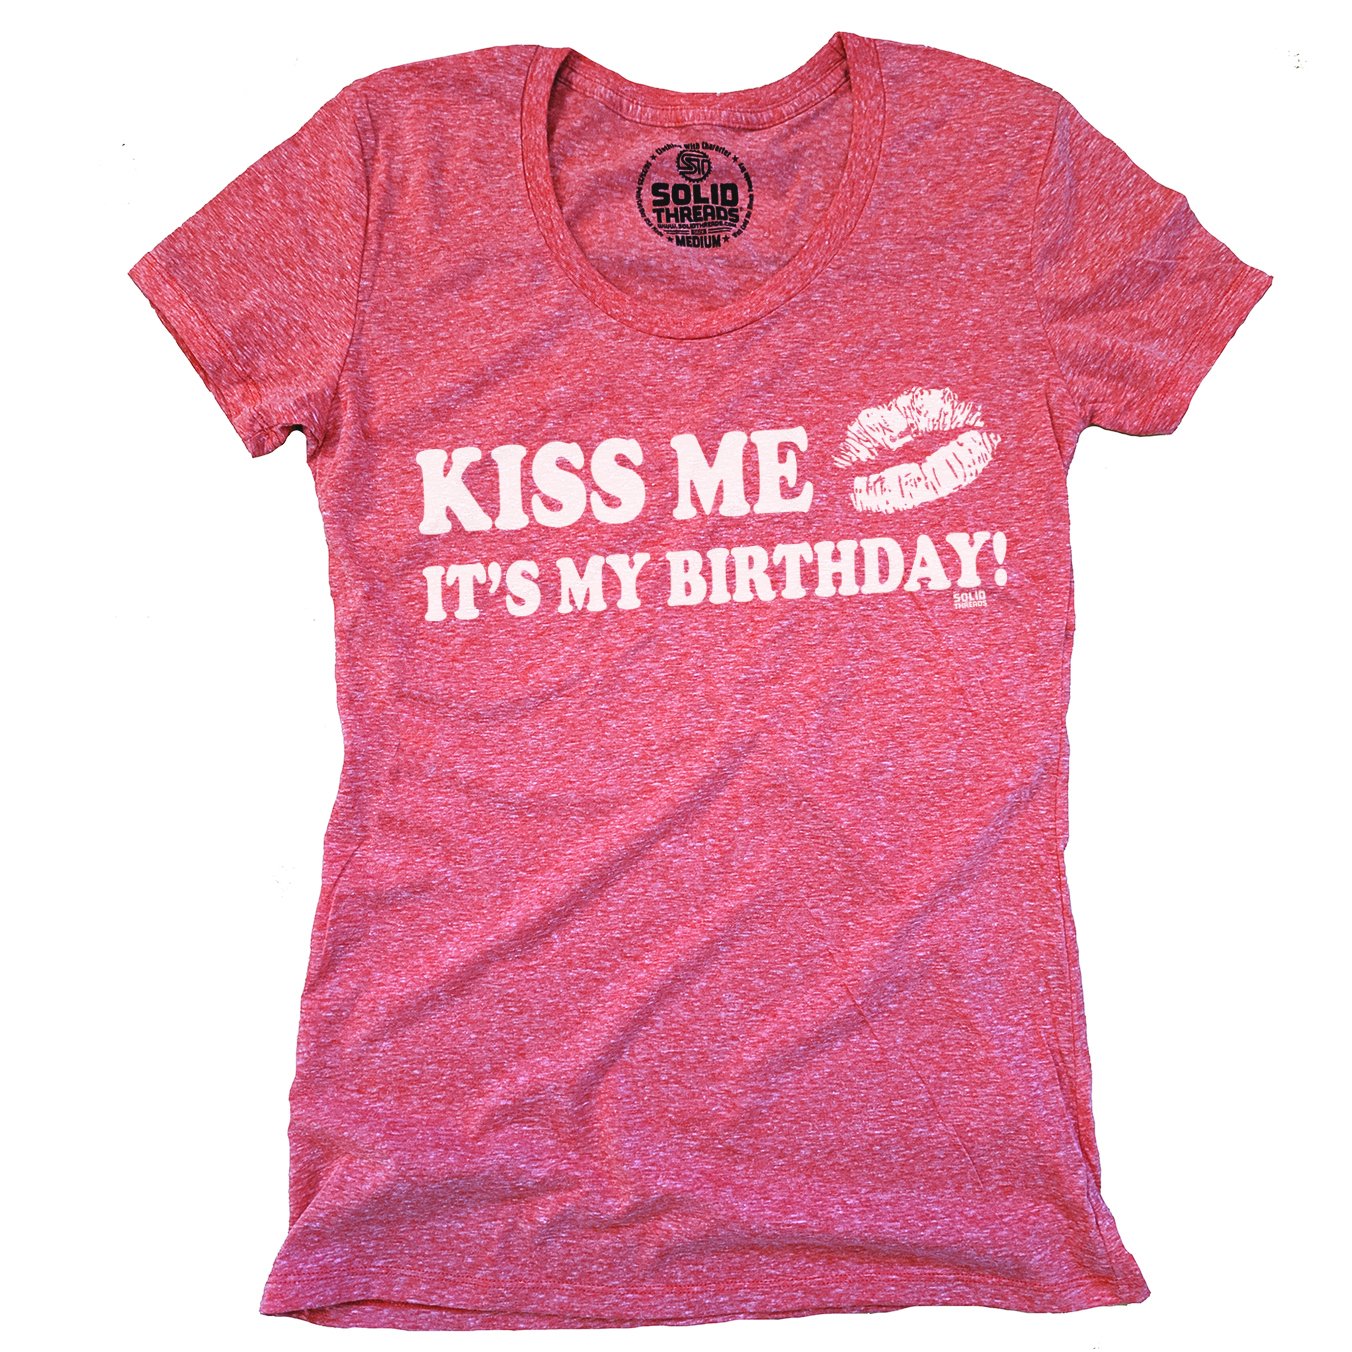 Women's Kiss Me It's My Birthday Vintage Inspired Scoopneck T-shirt | Cool Retro Funny Celebration Graphic Tee | Solid Threads